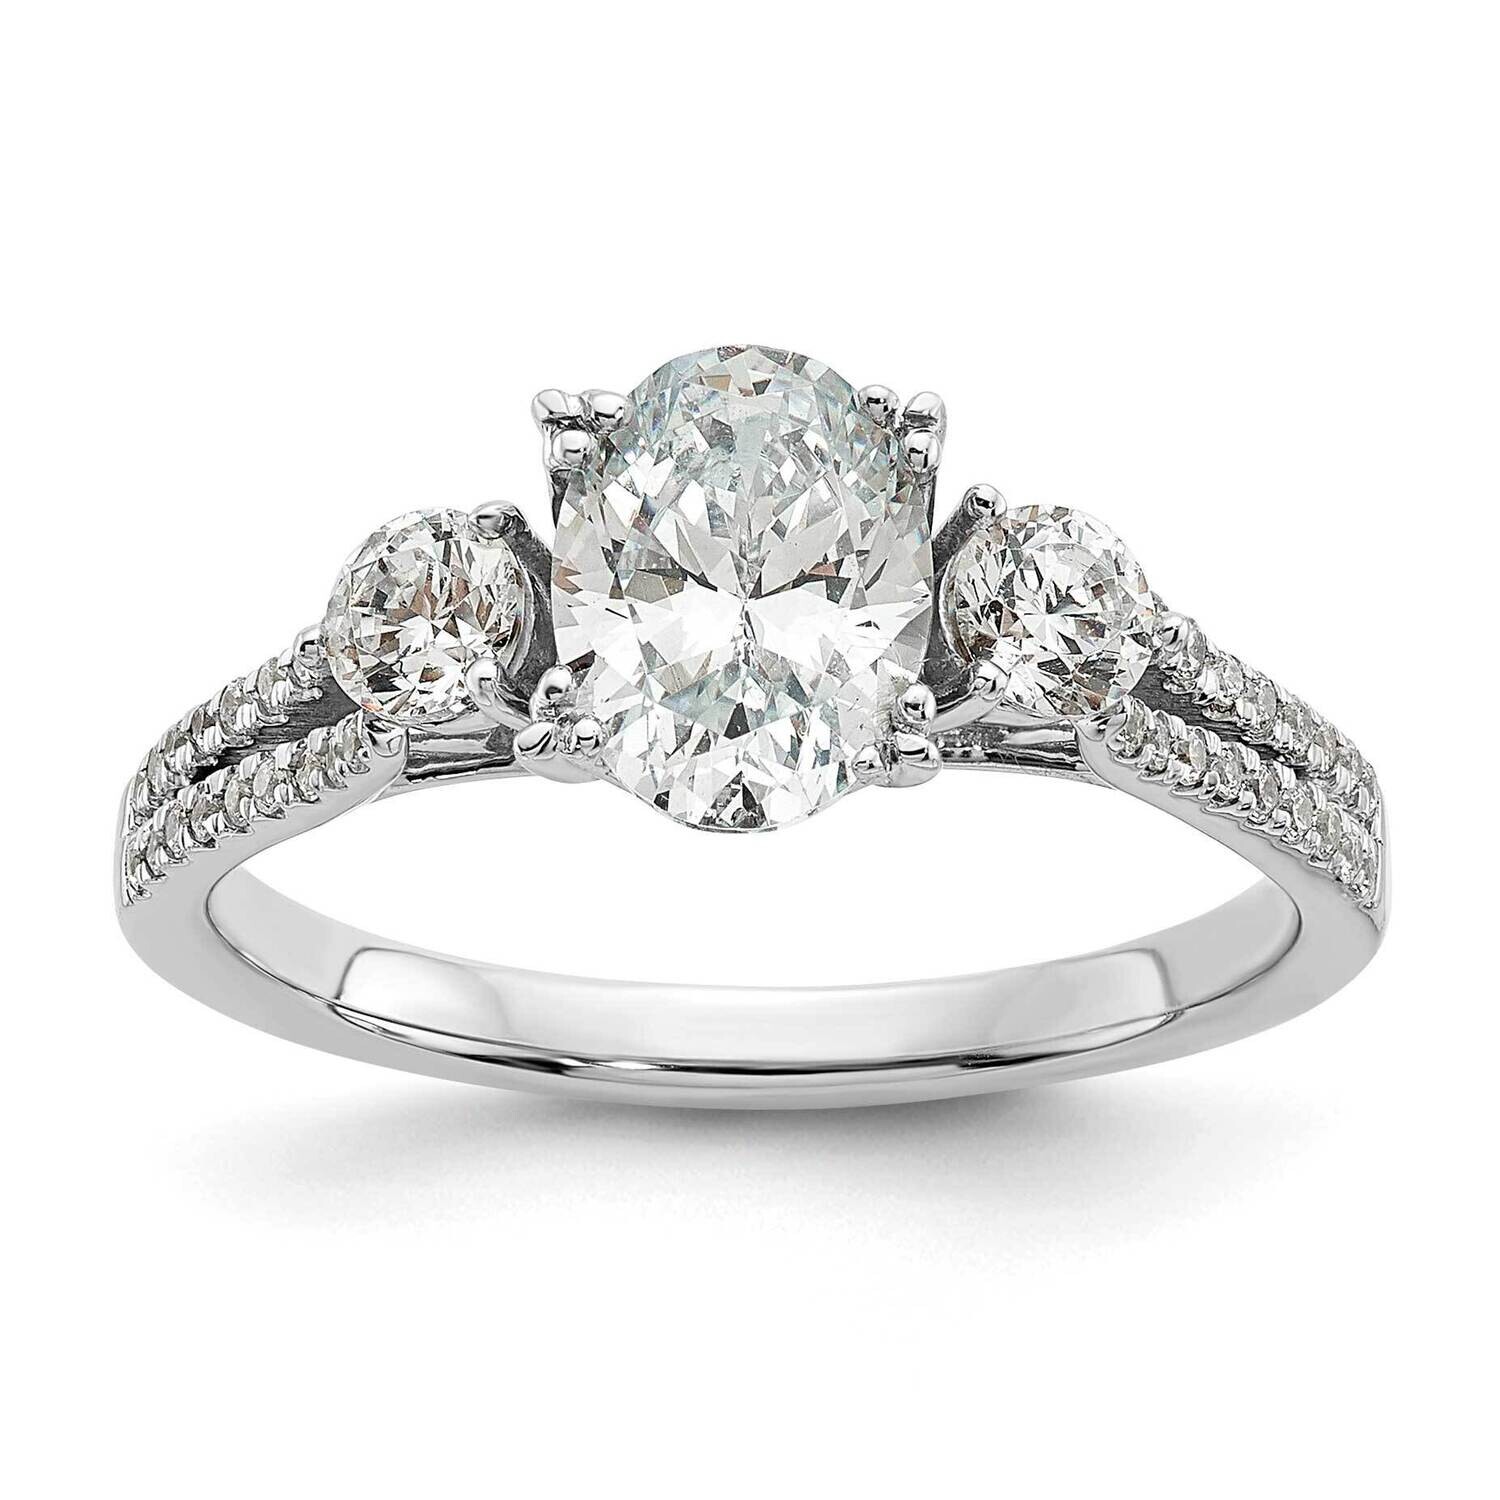 3 Stone 1Ct Oval Semi-Mount Including 2-3.2mm Side Stones Engagement Diamond Ring 14k White Gold RM7841E-100-WAA